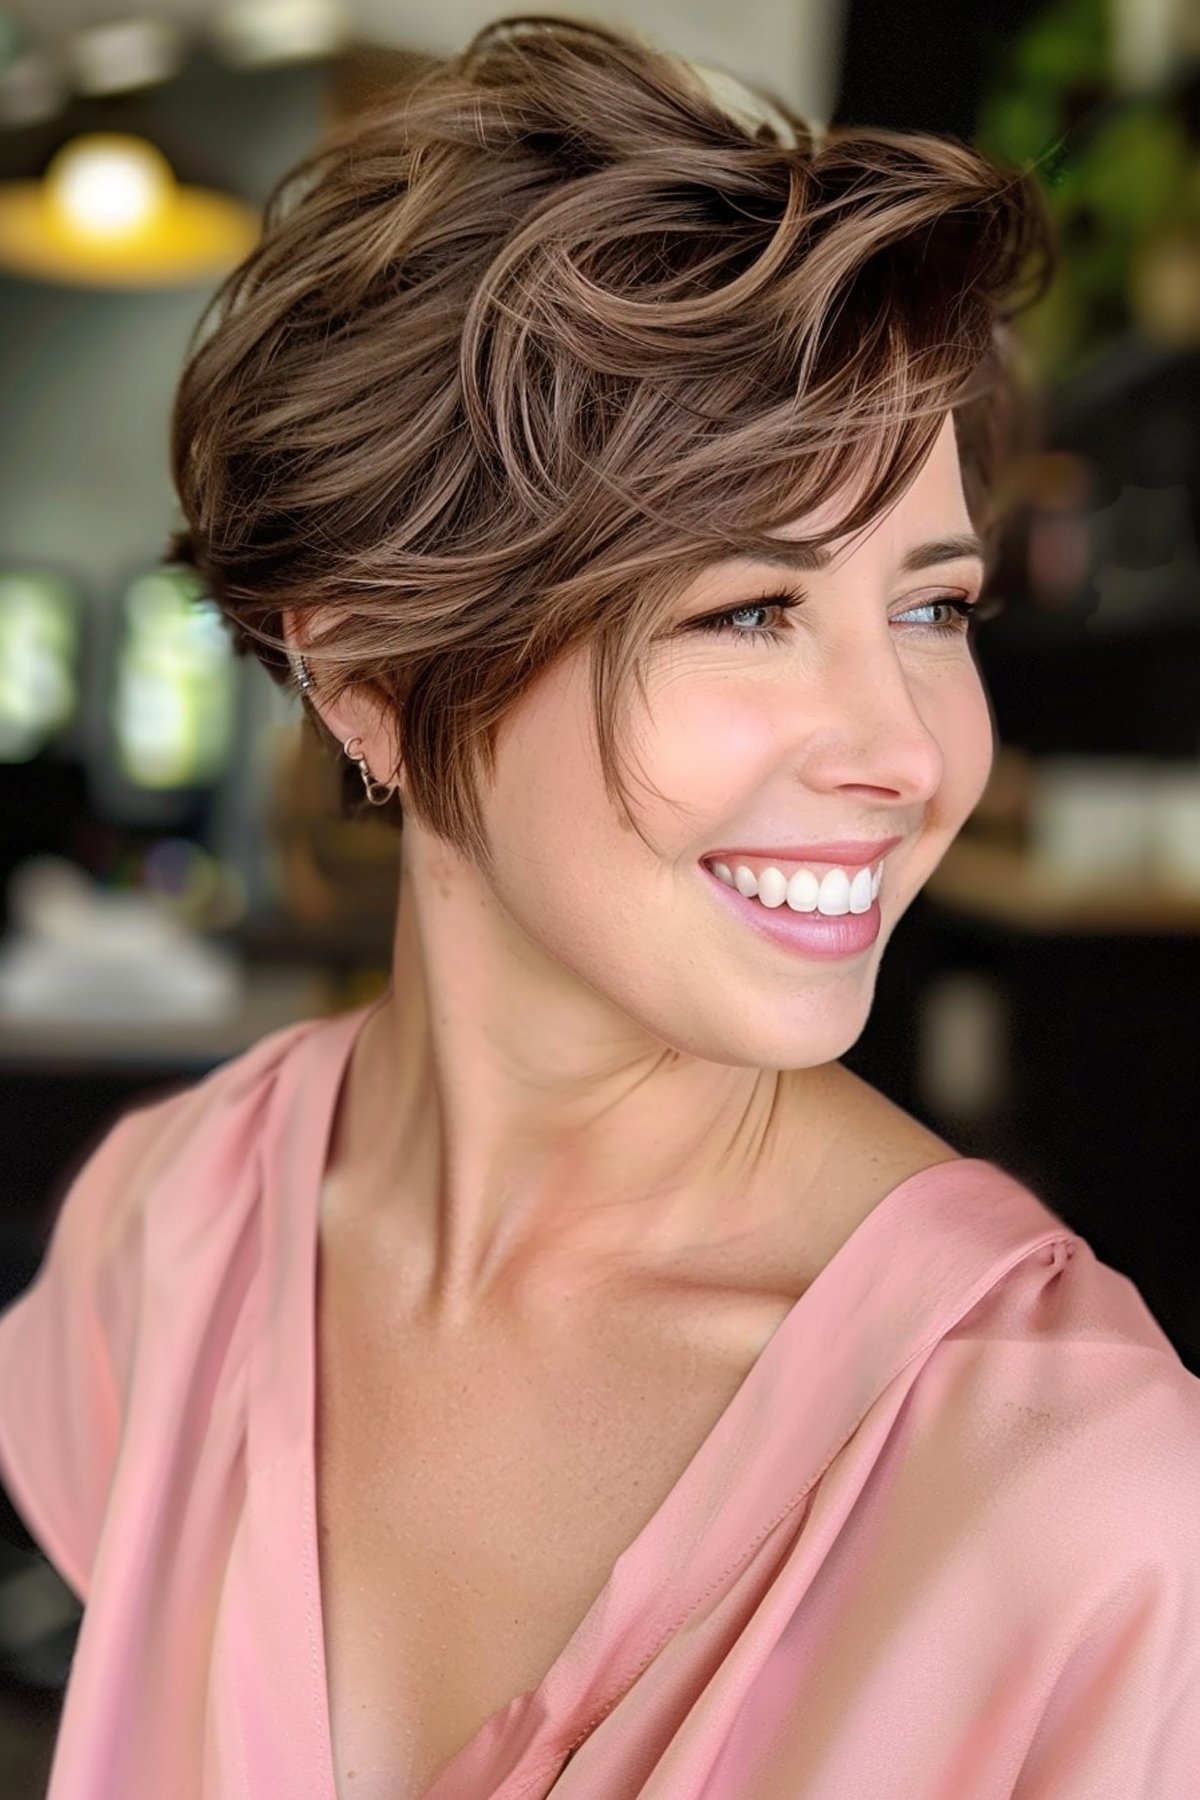 Brown tousled wavy pixie bob with undercut for a playful yet sophisticated look.